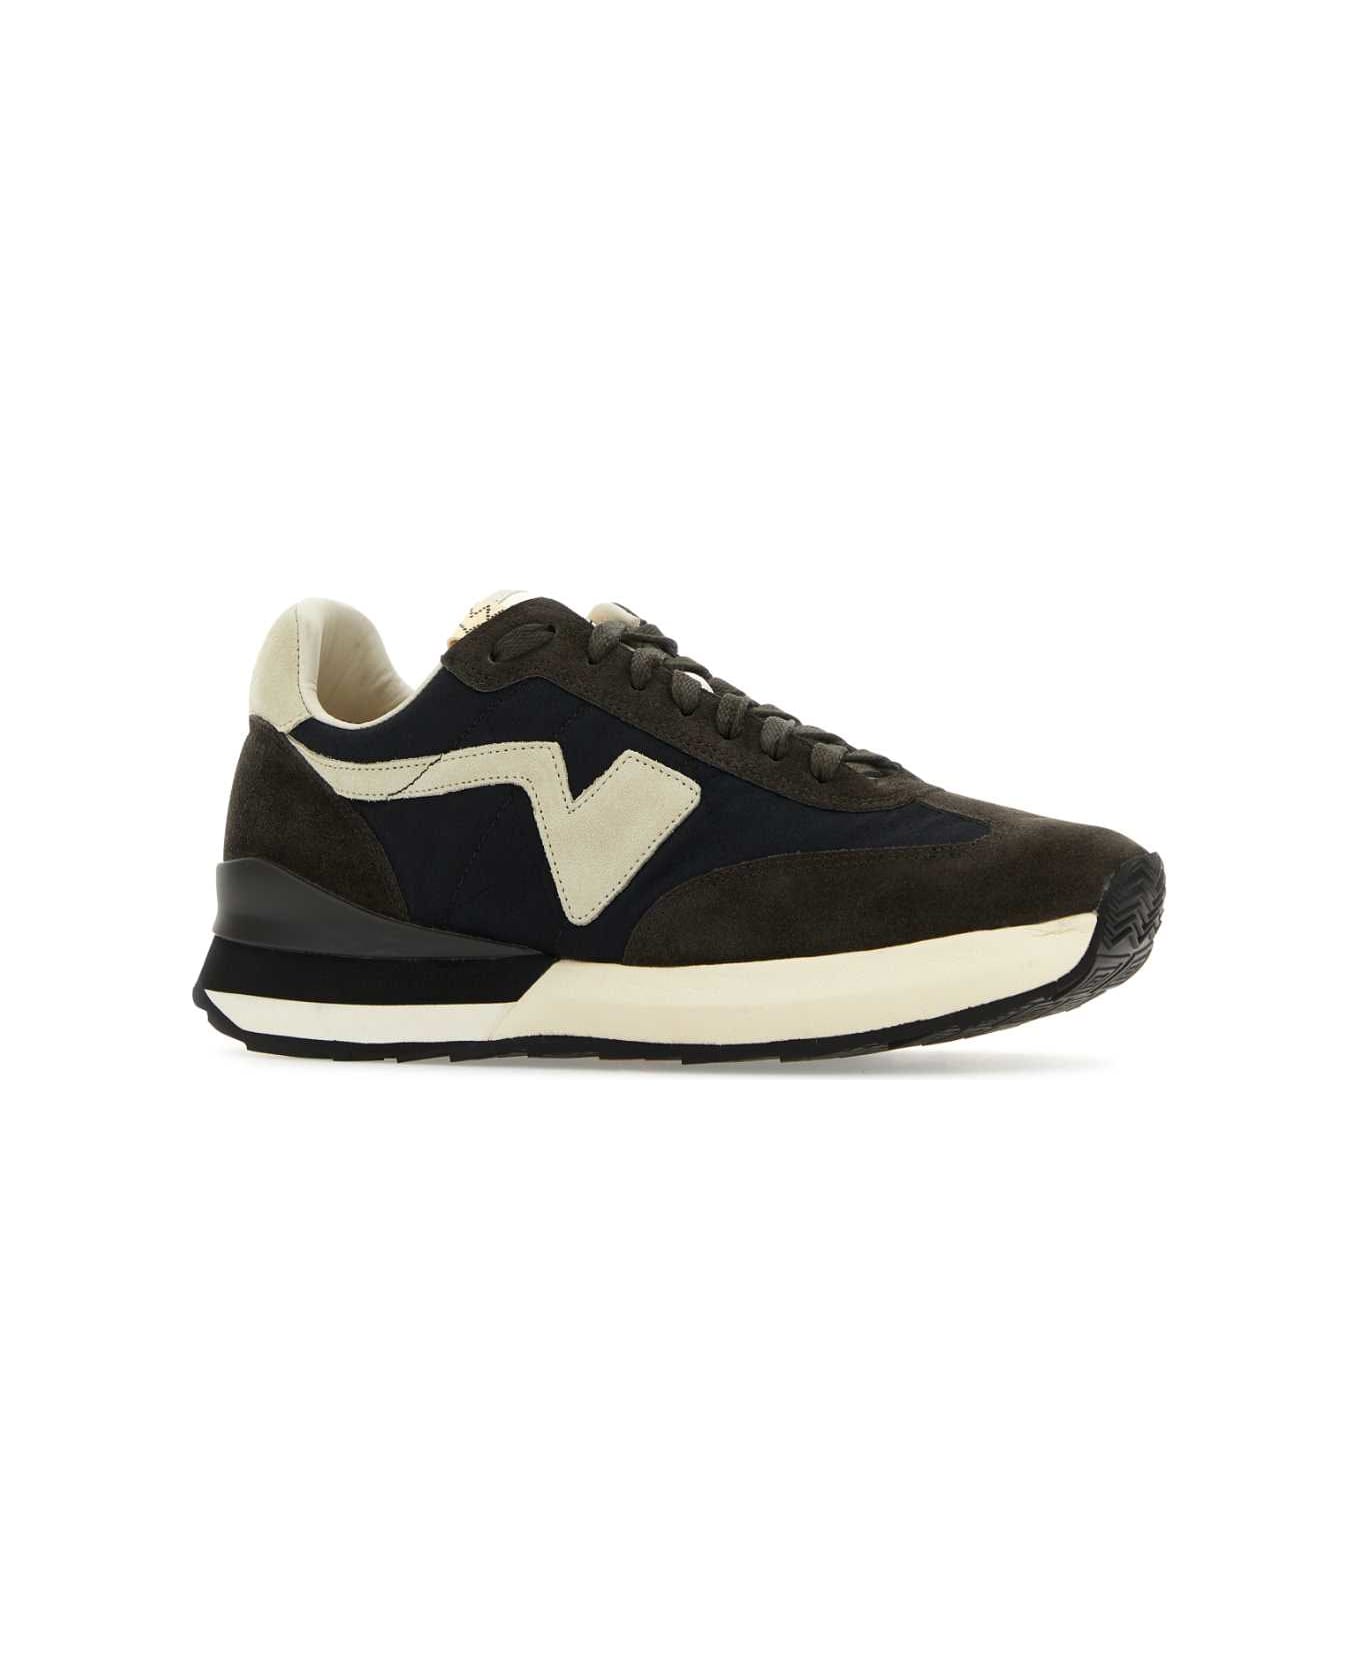 Visvim Multicolor Fabric And Suede Dunand Trainer Sneakers - BLACK